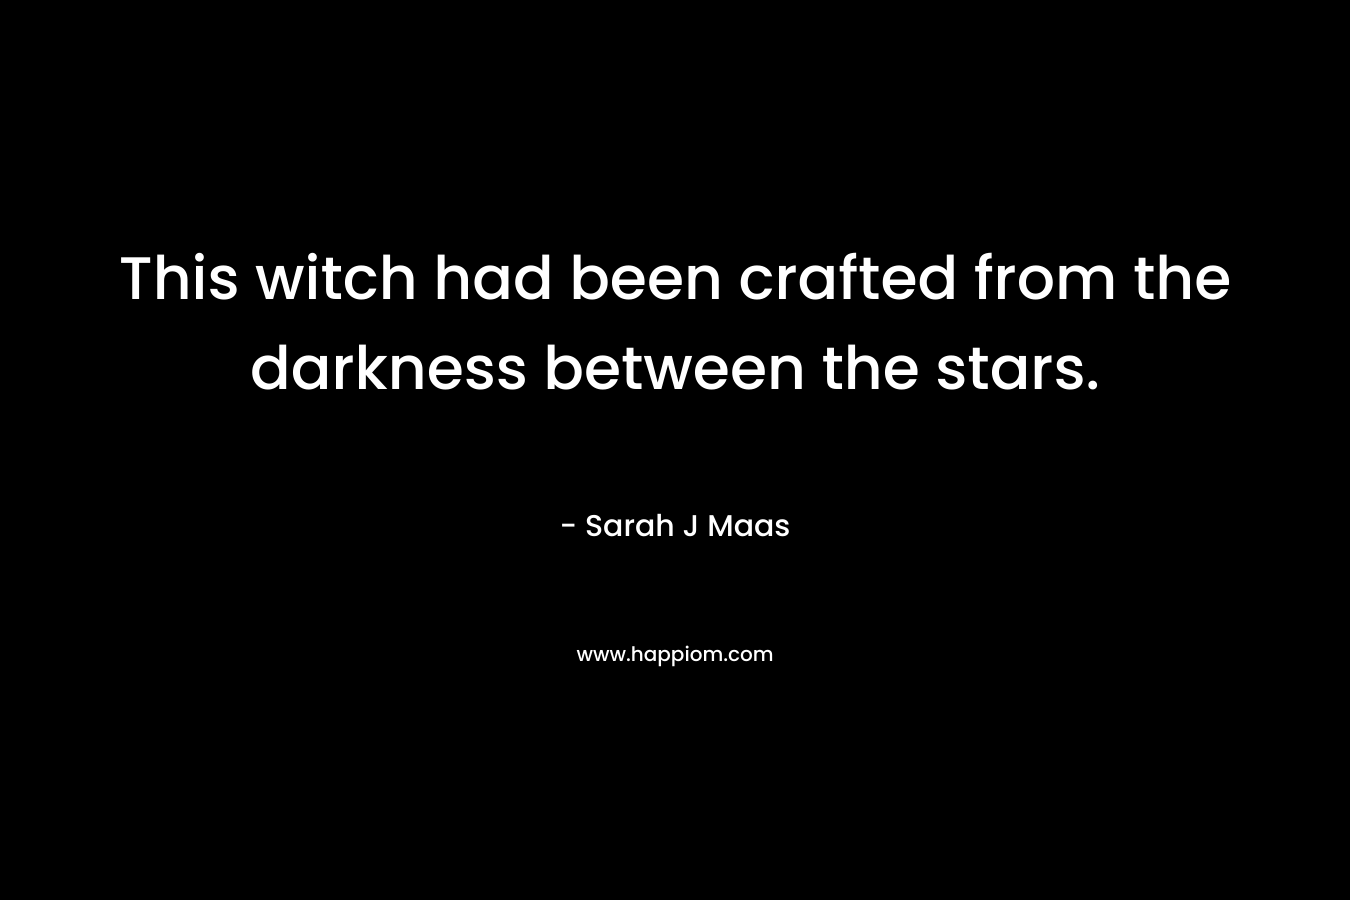 This witch had been crafted from the darkness between the stars.